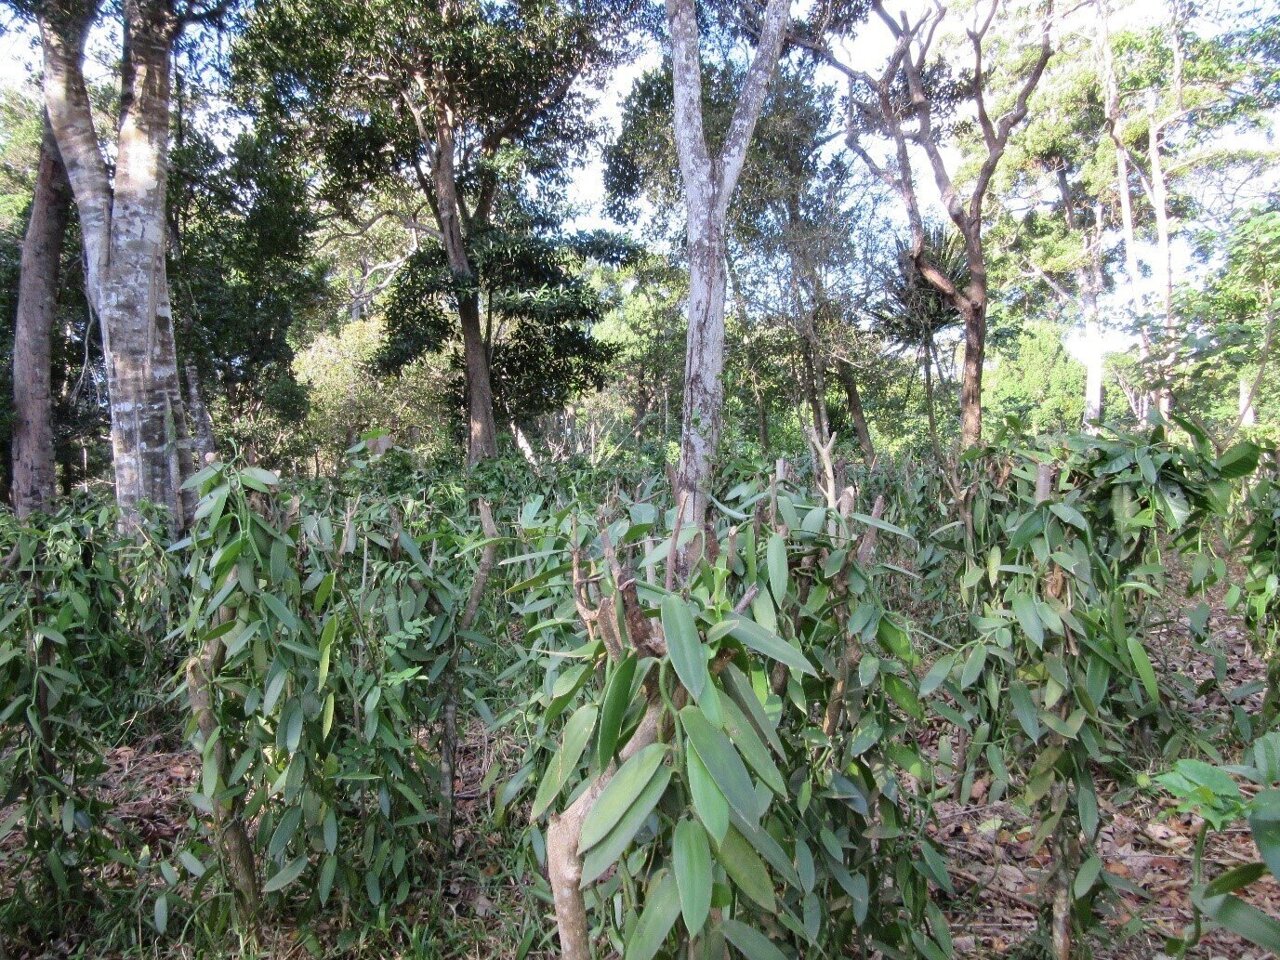 How vanilla cultivation in the right place pays off for people and nature